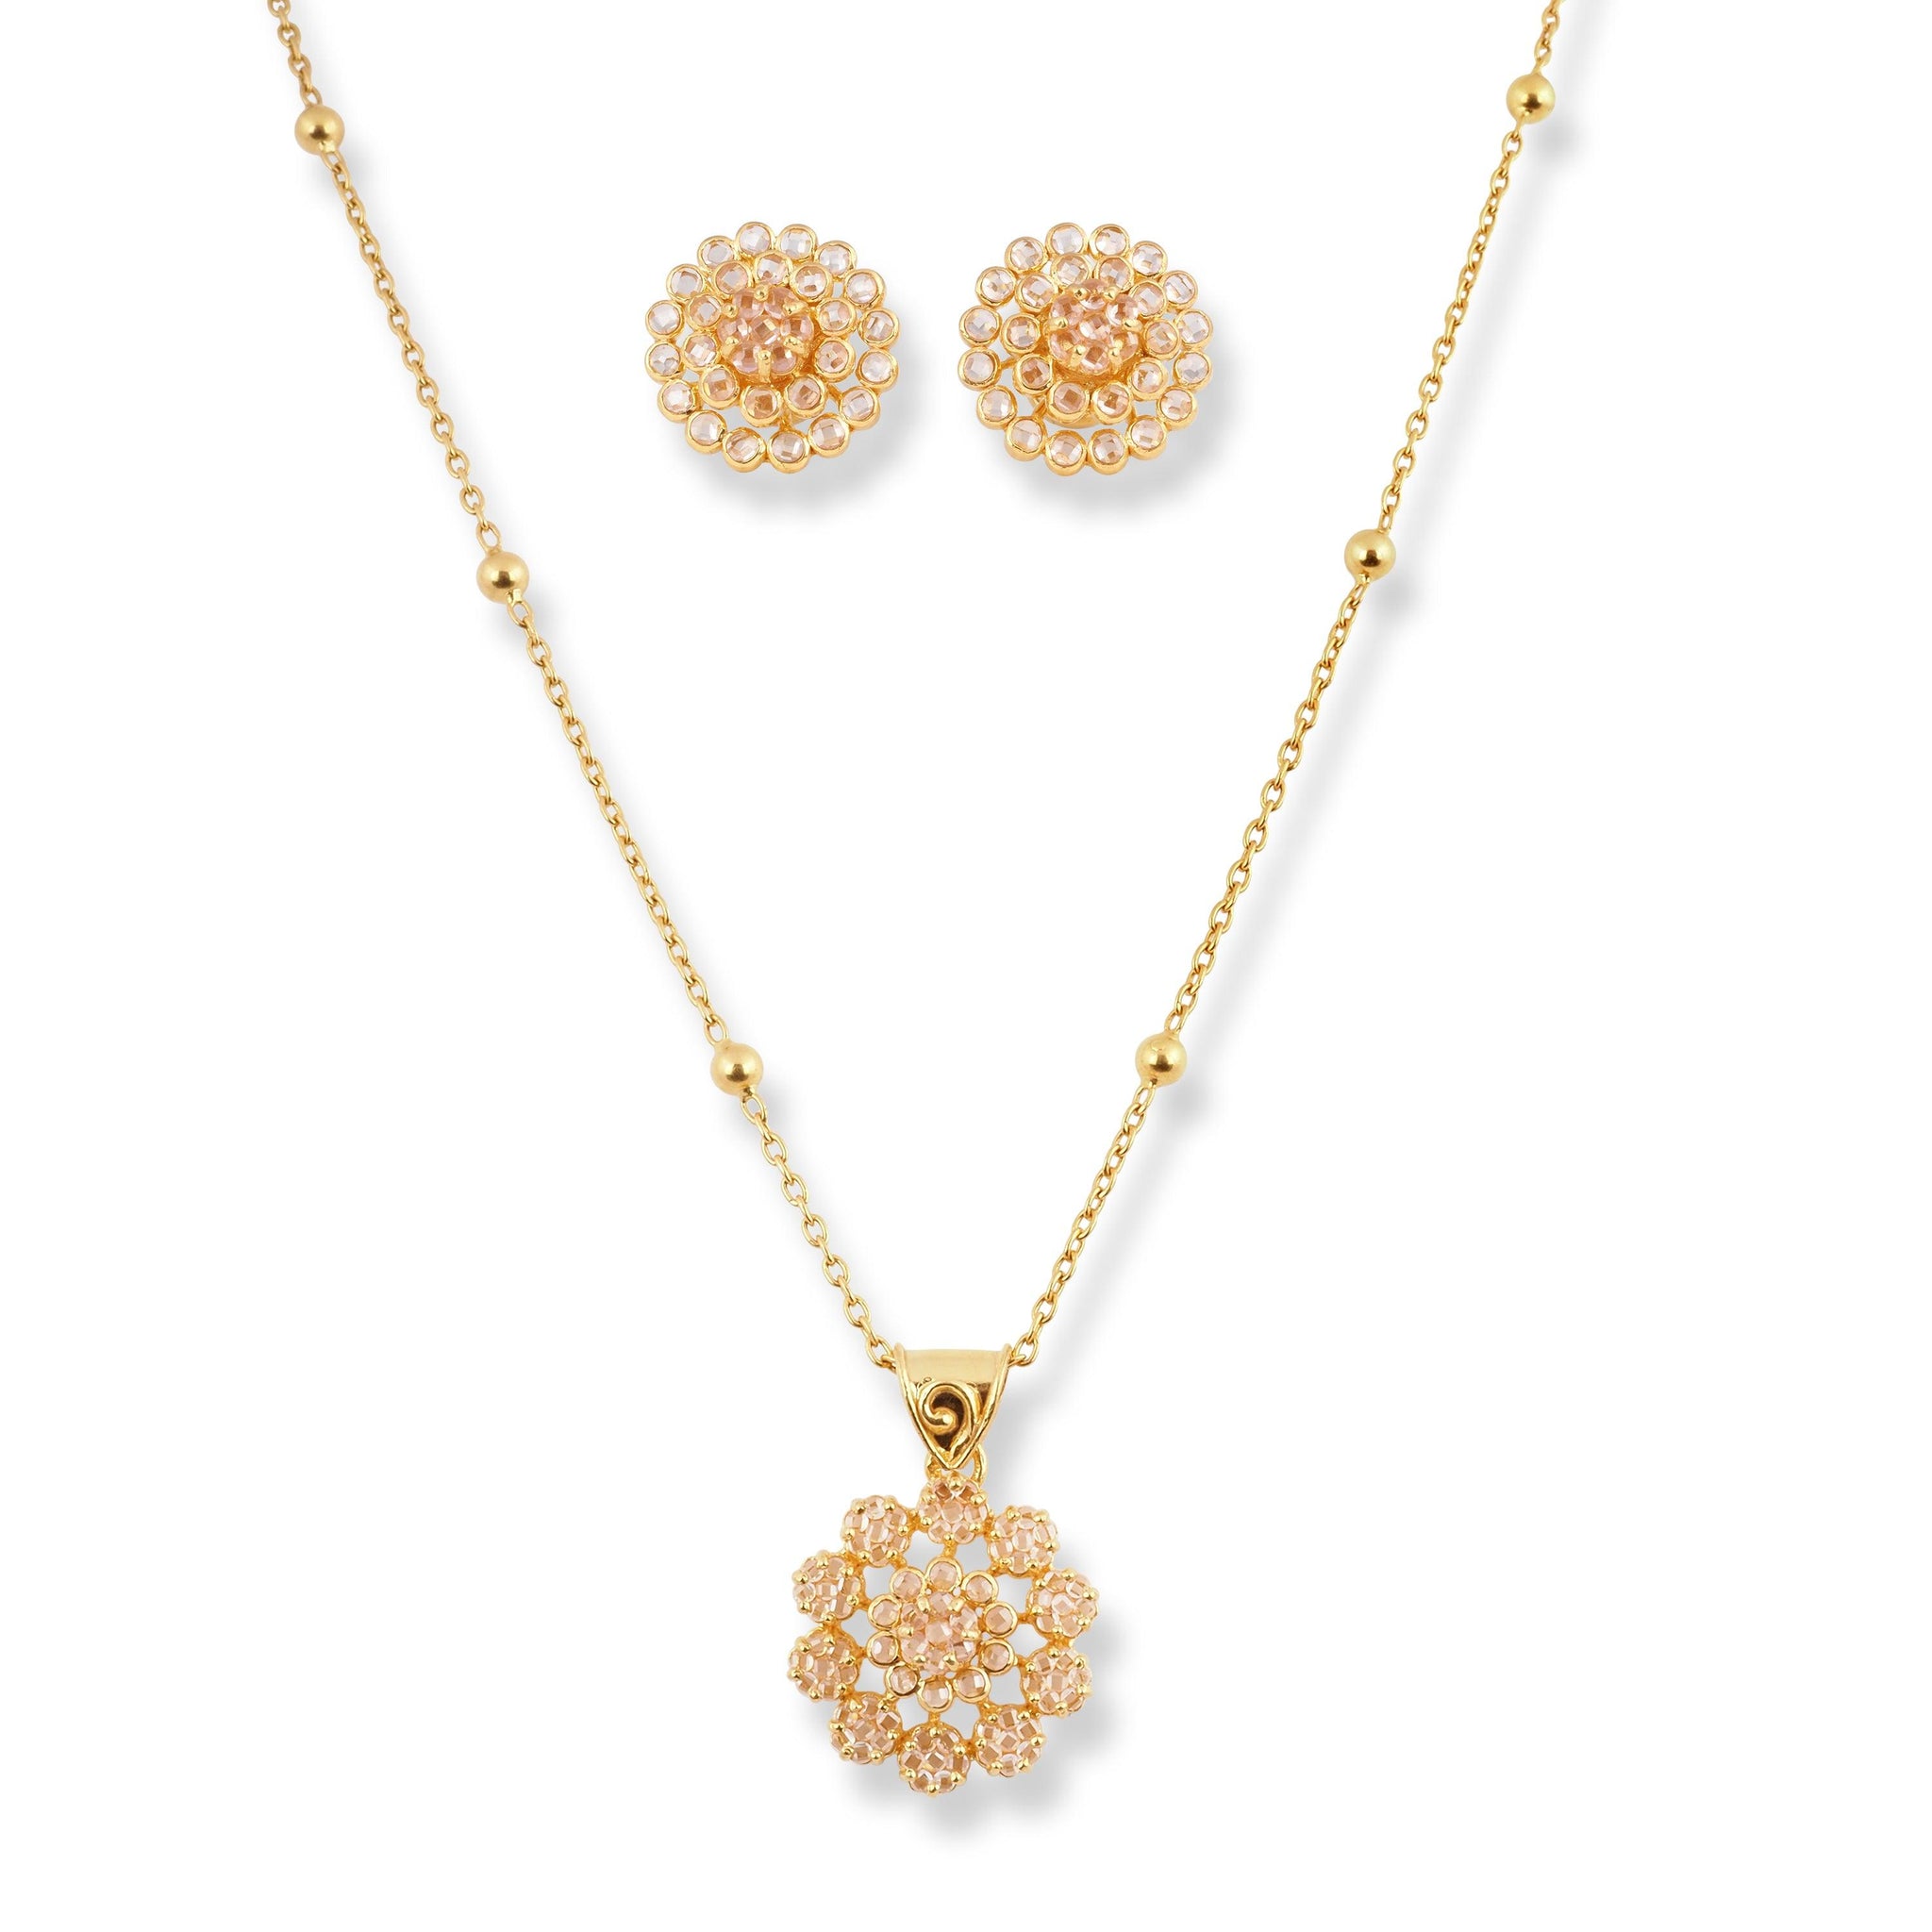 22ct Yellow Gold Necklace & Earring Suite with Polki Style Cubic Zirconia Stones